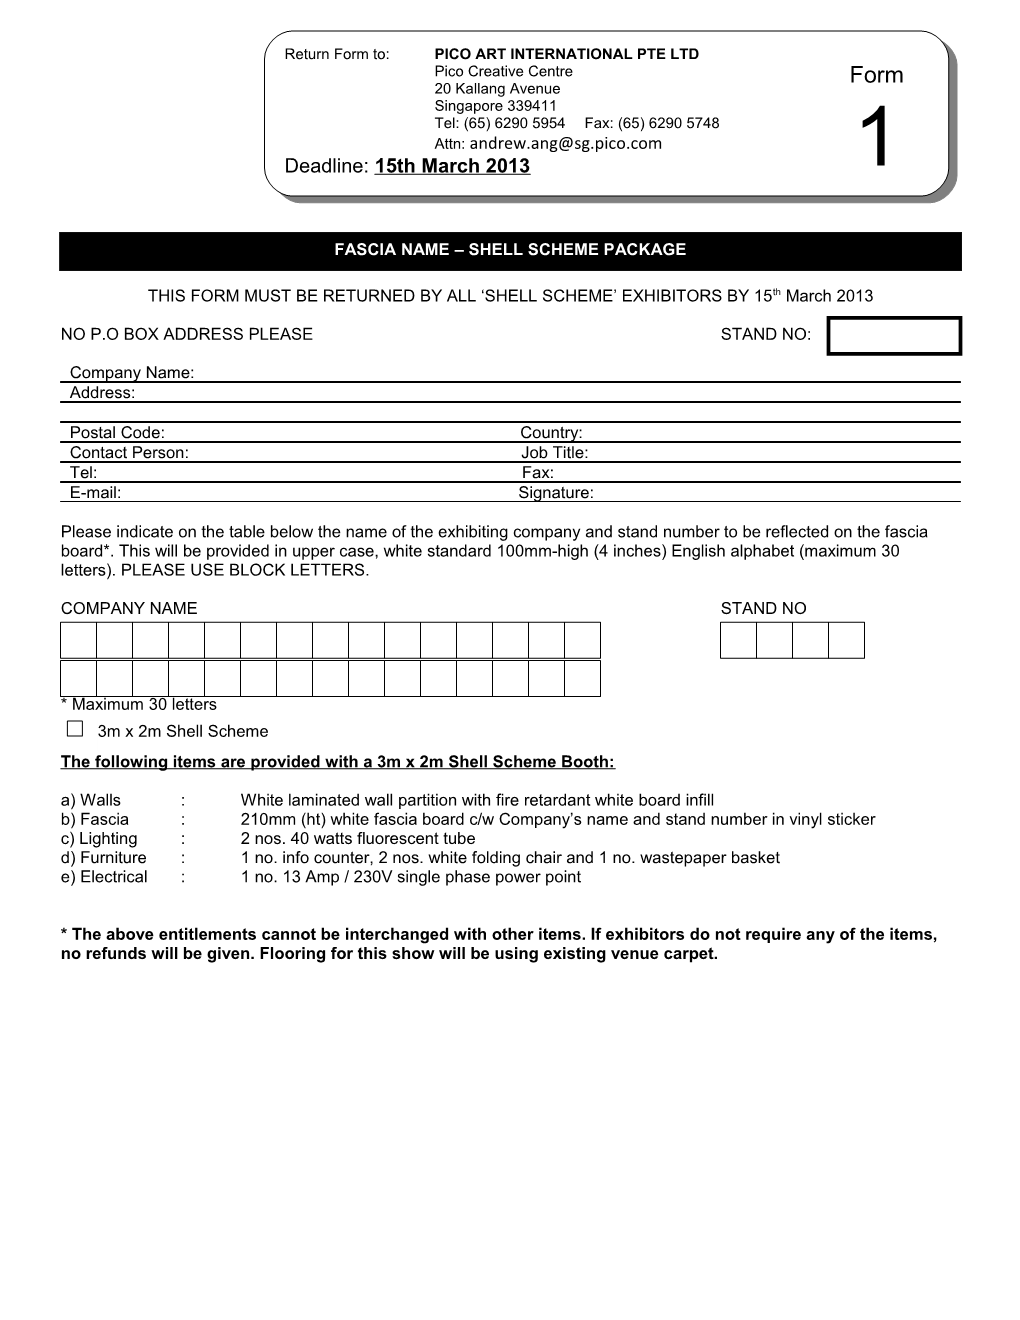 THIS FORM MUST BE RETURNED by ALL SHELL SCHEME EXHIBITORS by 15Th March 2013